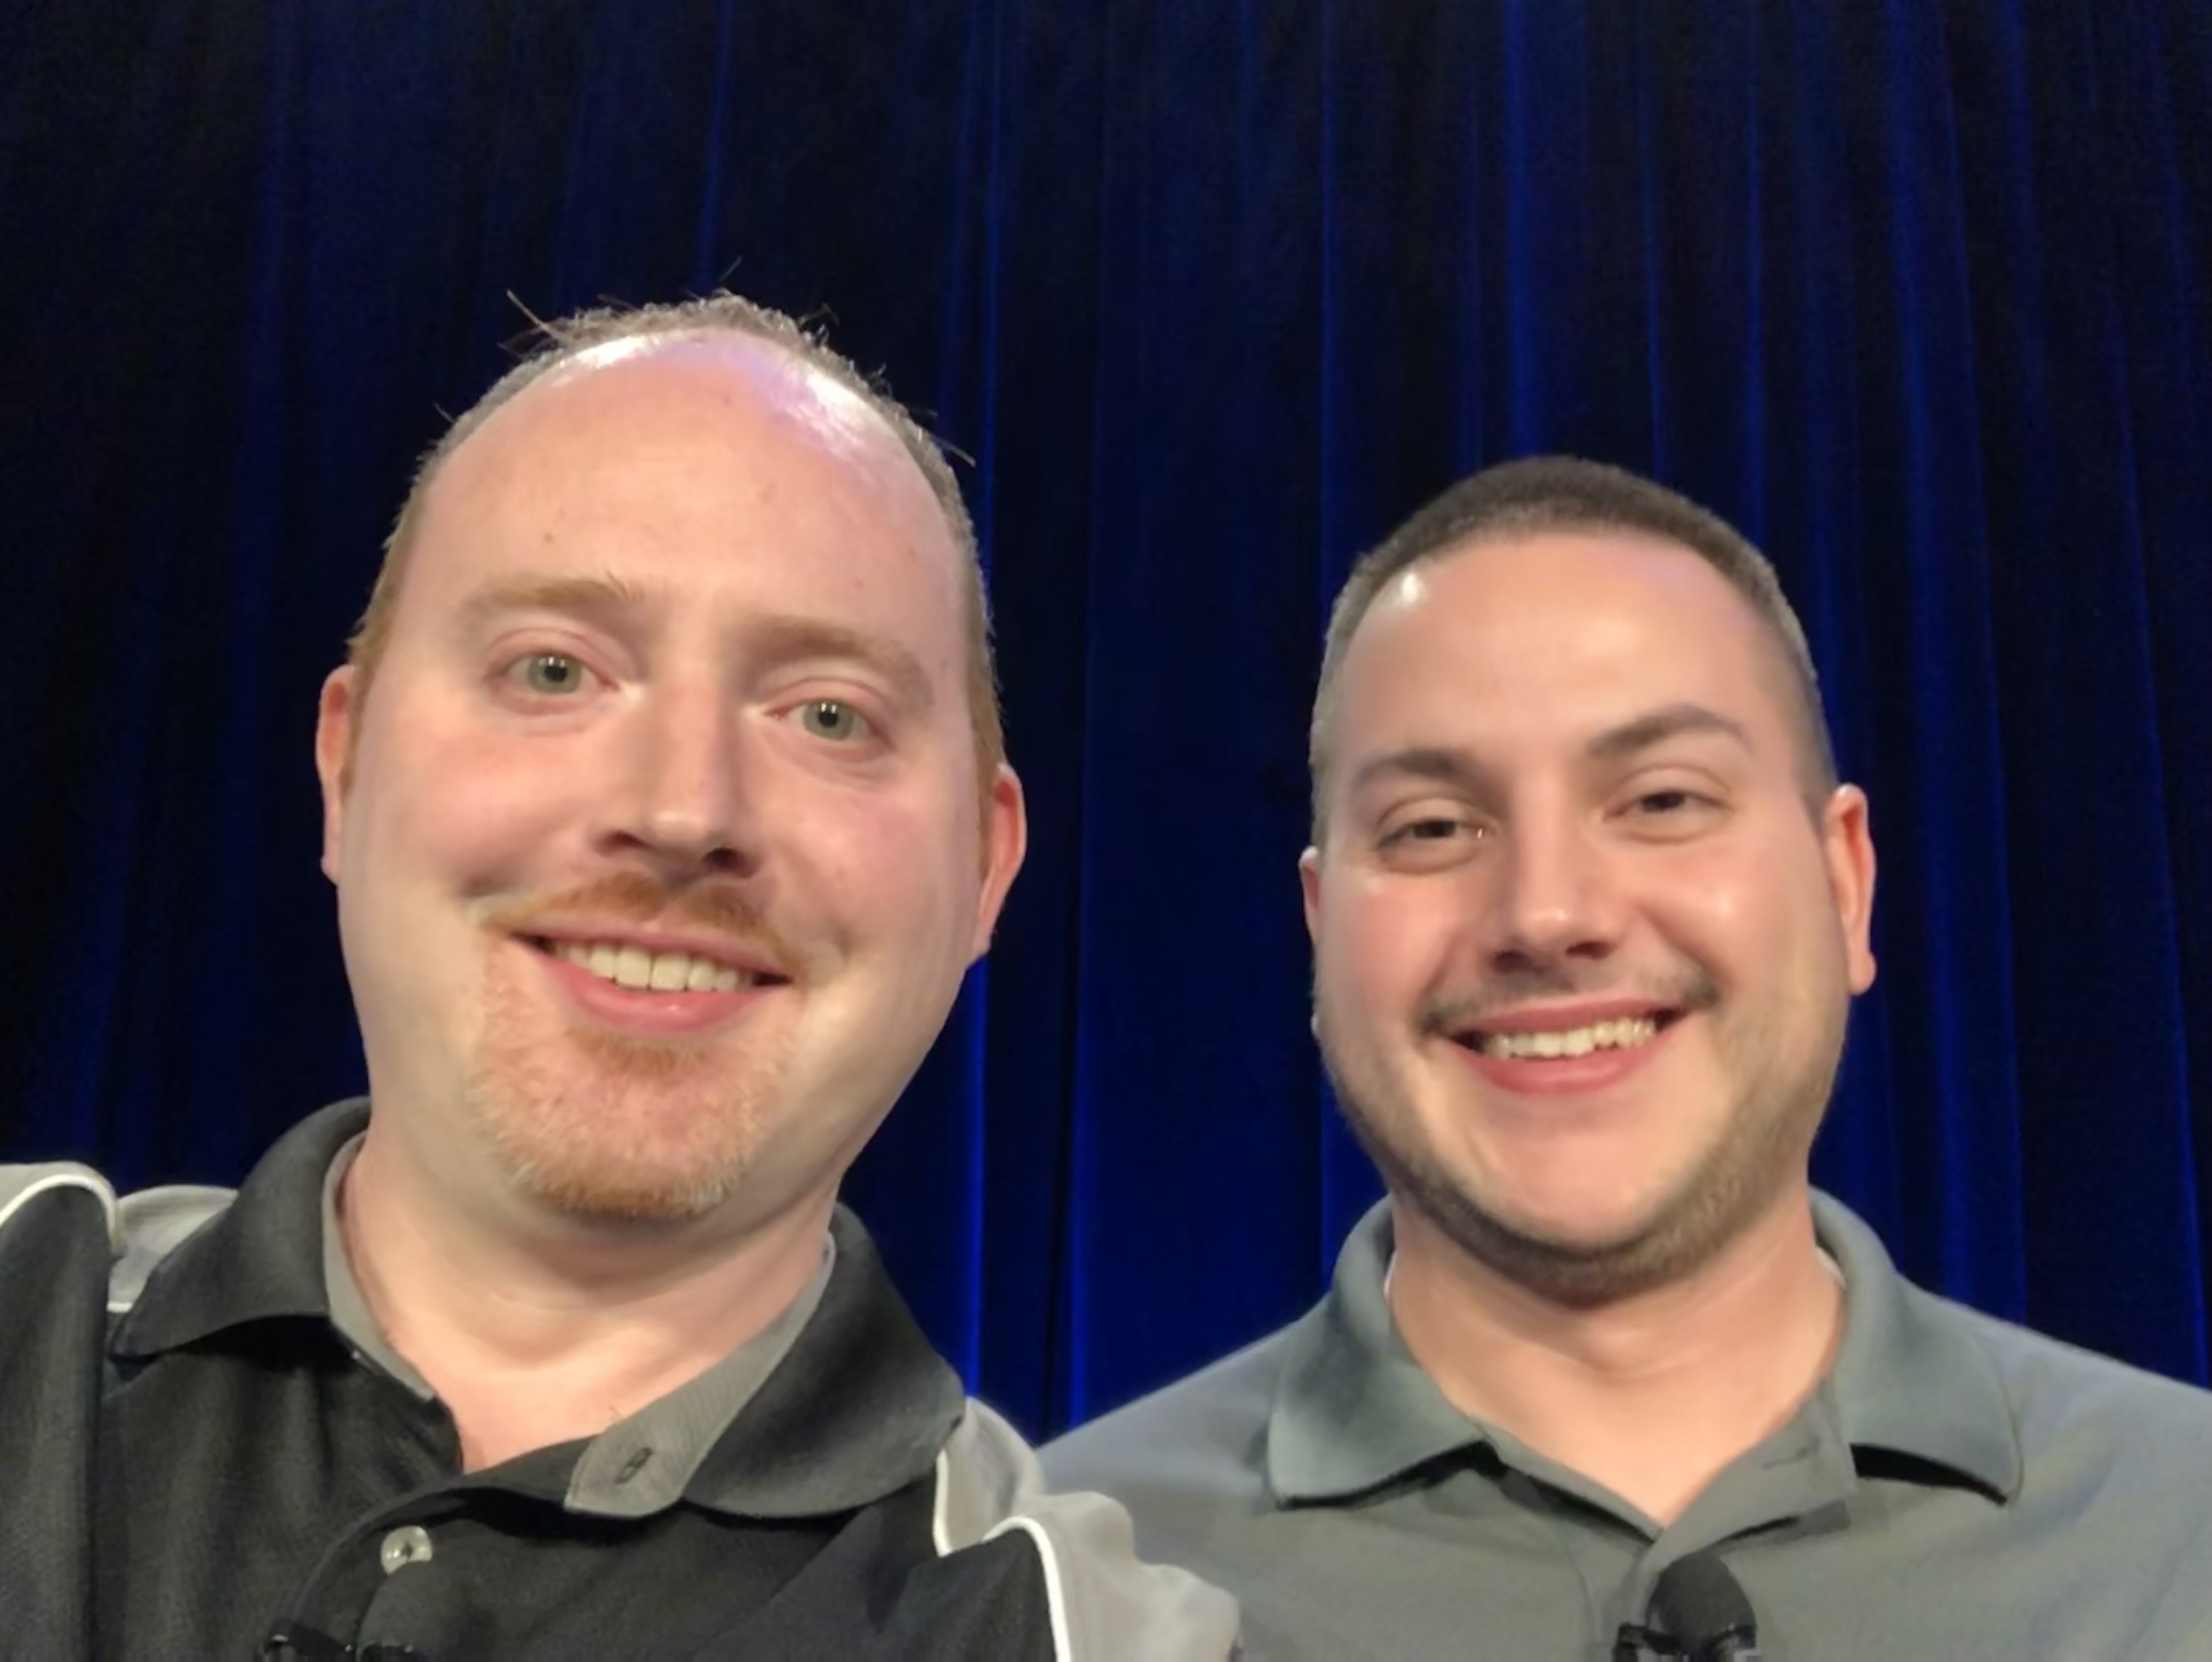 Ryan and I at re:Invent 2017 before our breakout session